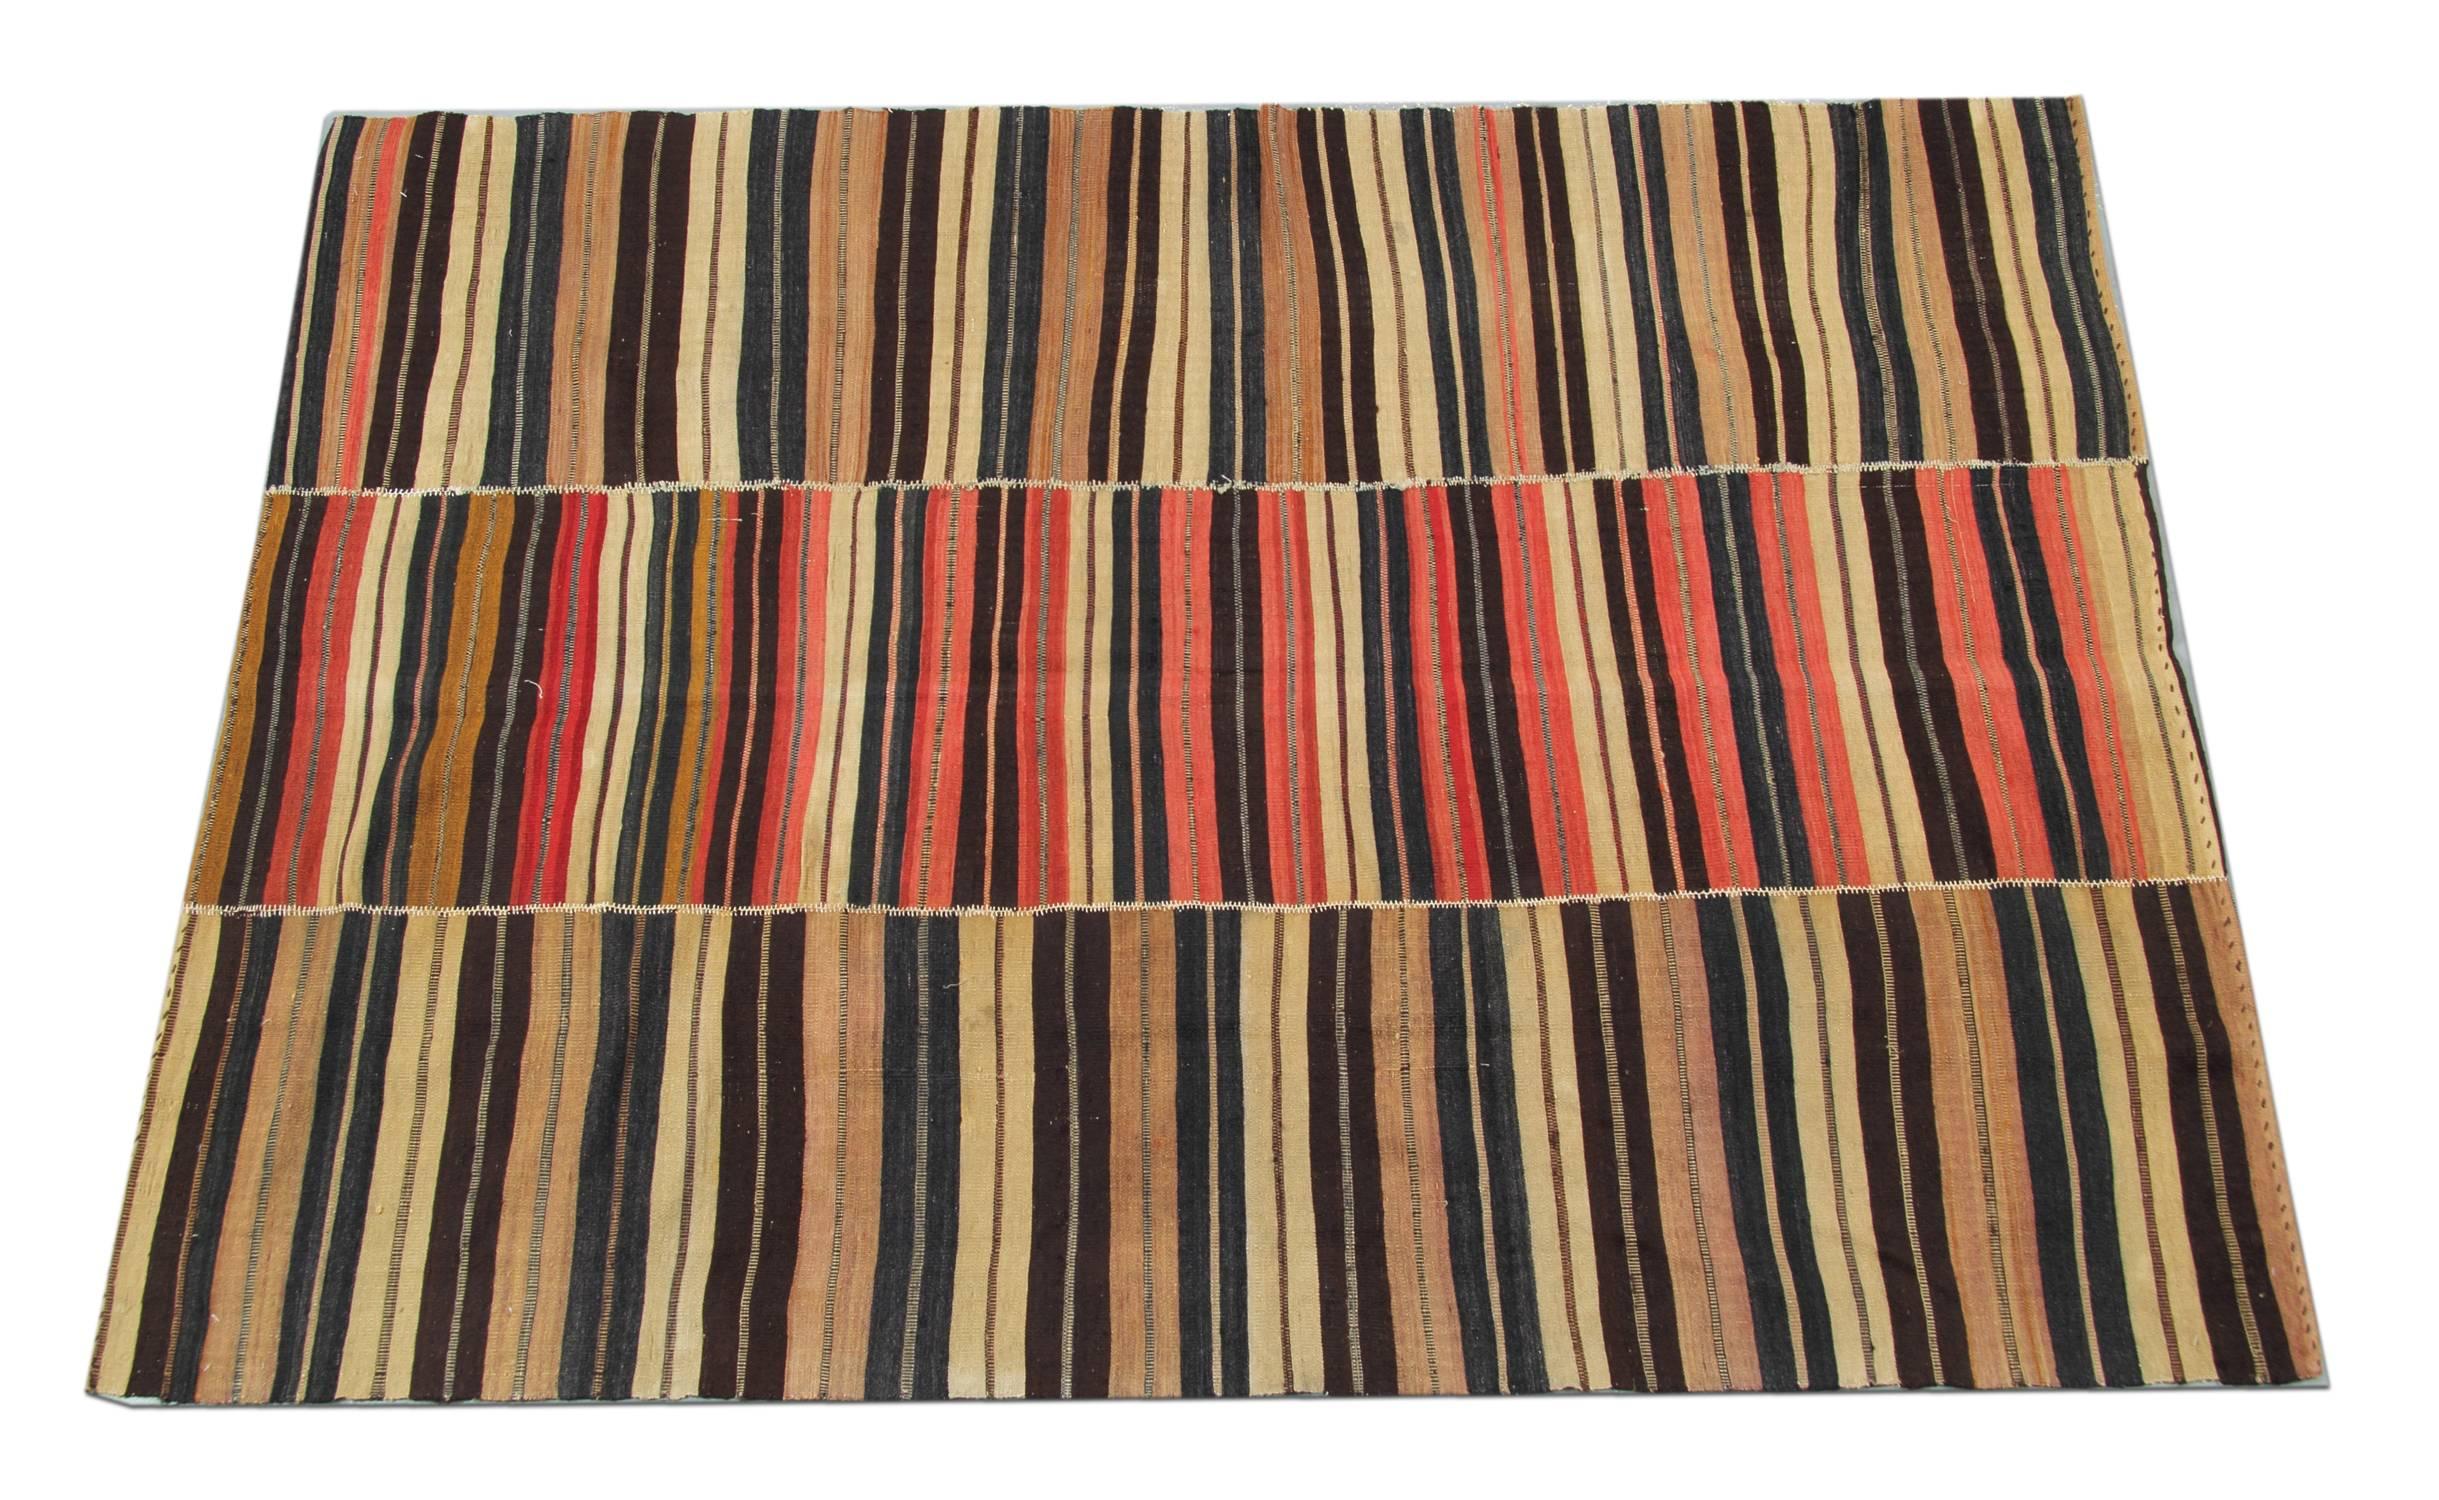 This geometric rug is a practical variation on the flat-weave Jajim, this Persian coverlet, or Jajim, features a bold, inherently versatile pattern of multi-width stripes perfectly on the woven rug suited for Mid-Century modern interiors. Ochre and